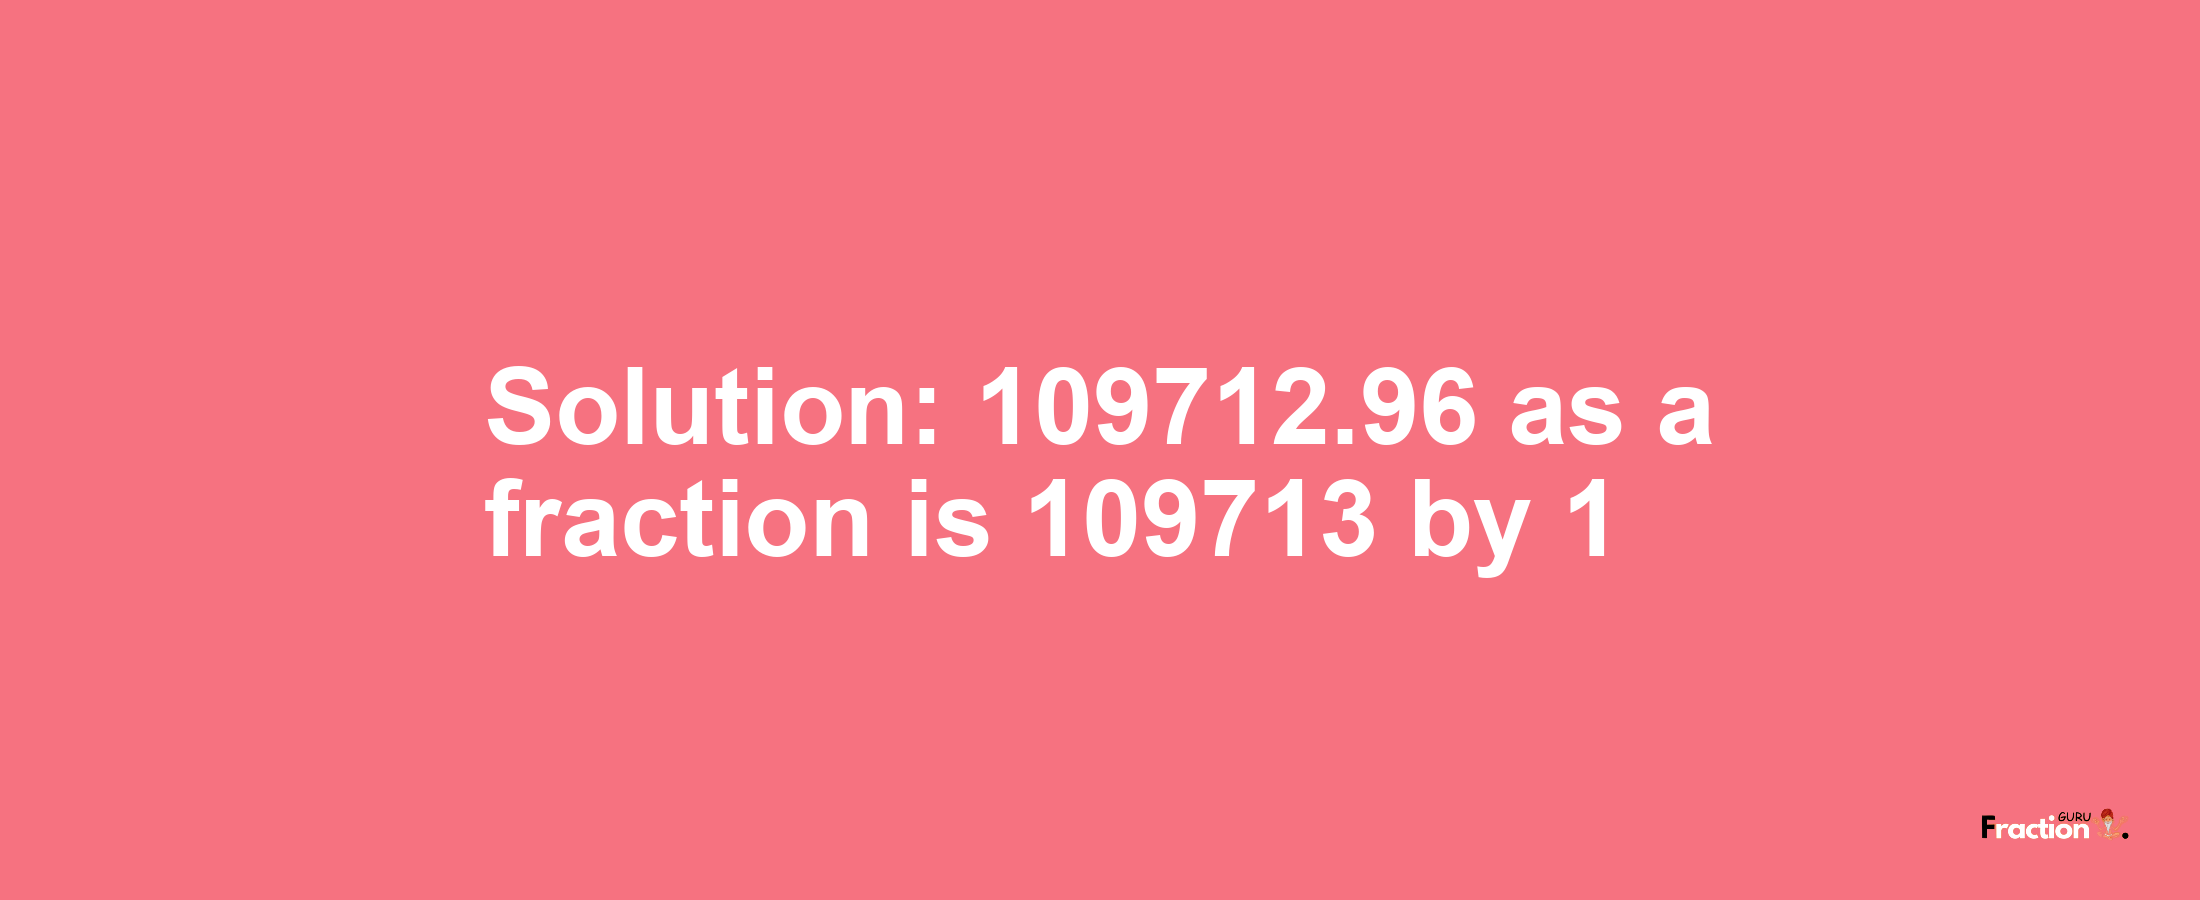 Solution:109712.96 as a fraction is 109713/1